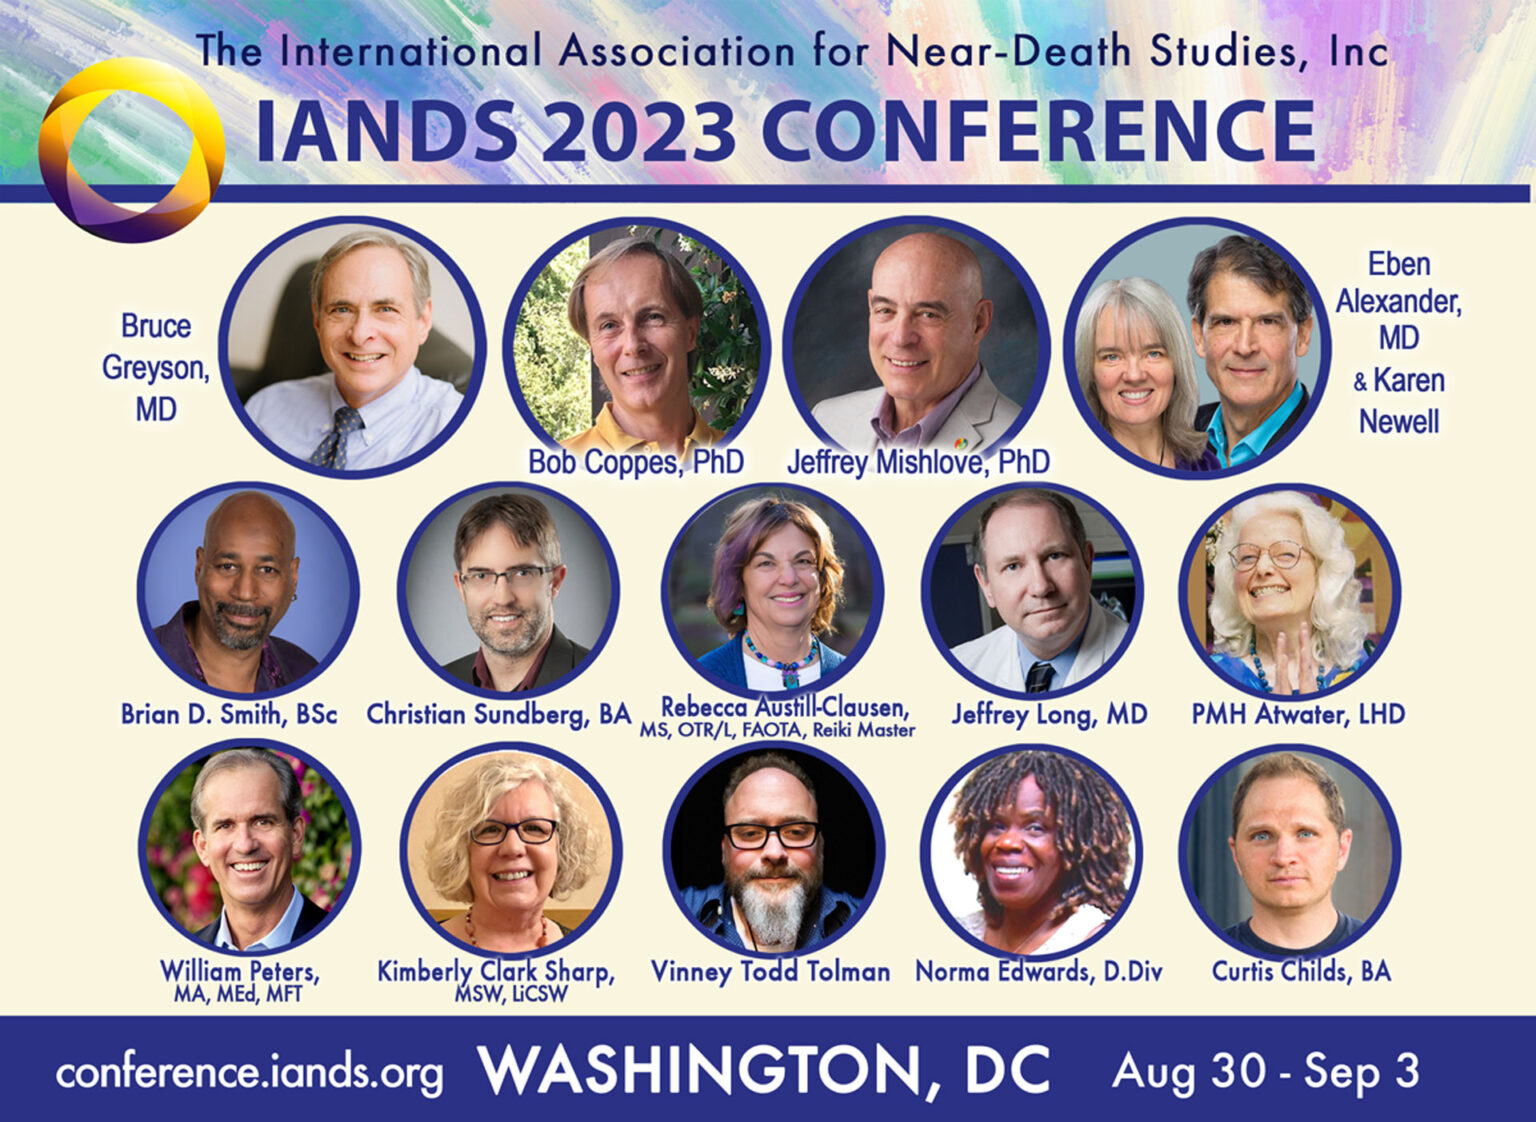 IANDS 2024 Conference Live plus Online Transformed by NearDeath